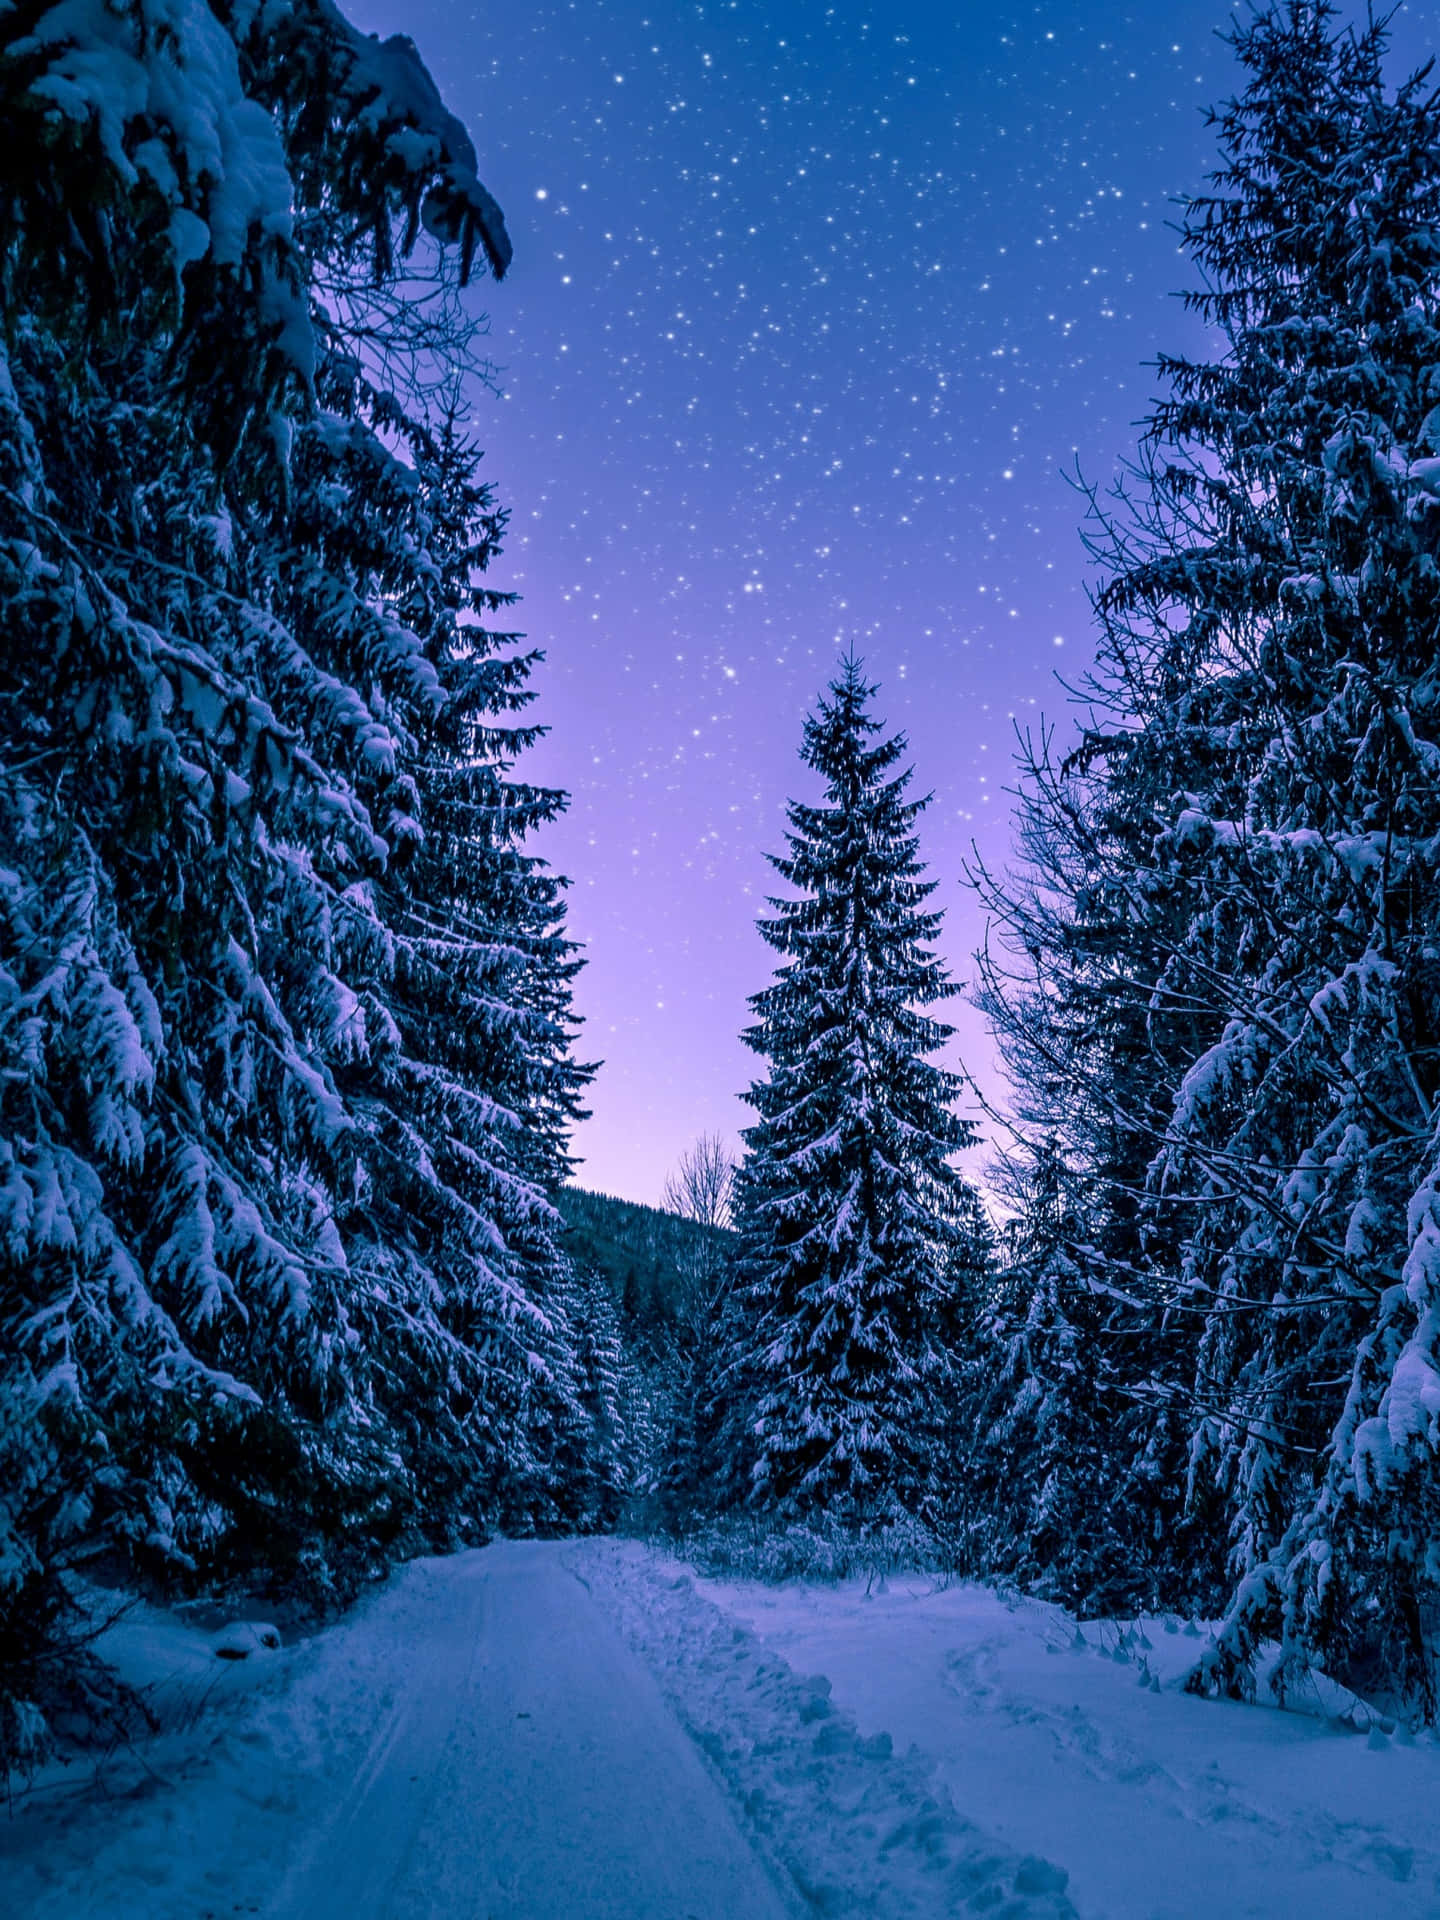 "The Serene Beauty of a Snowy Forest"